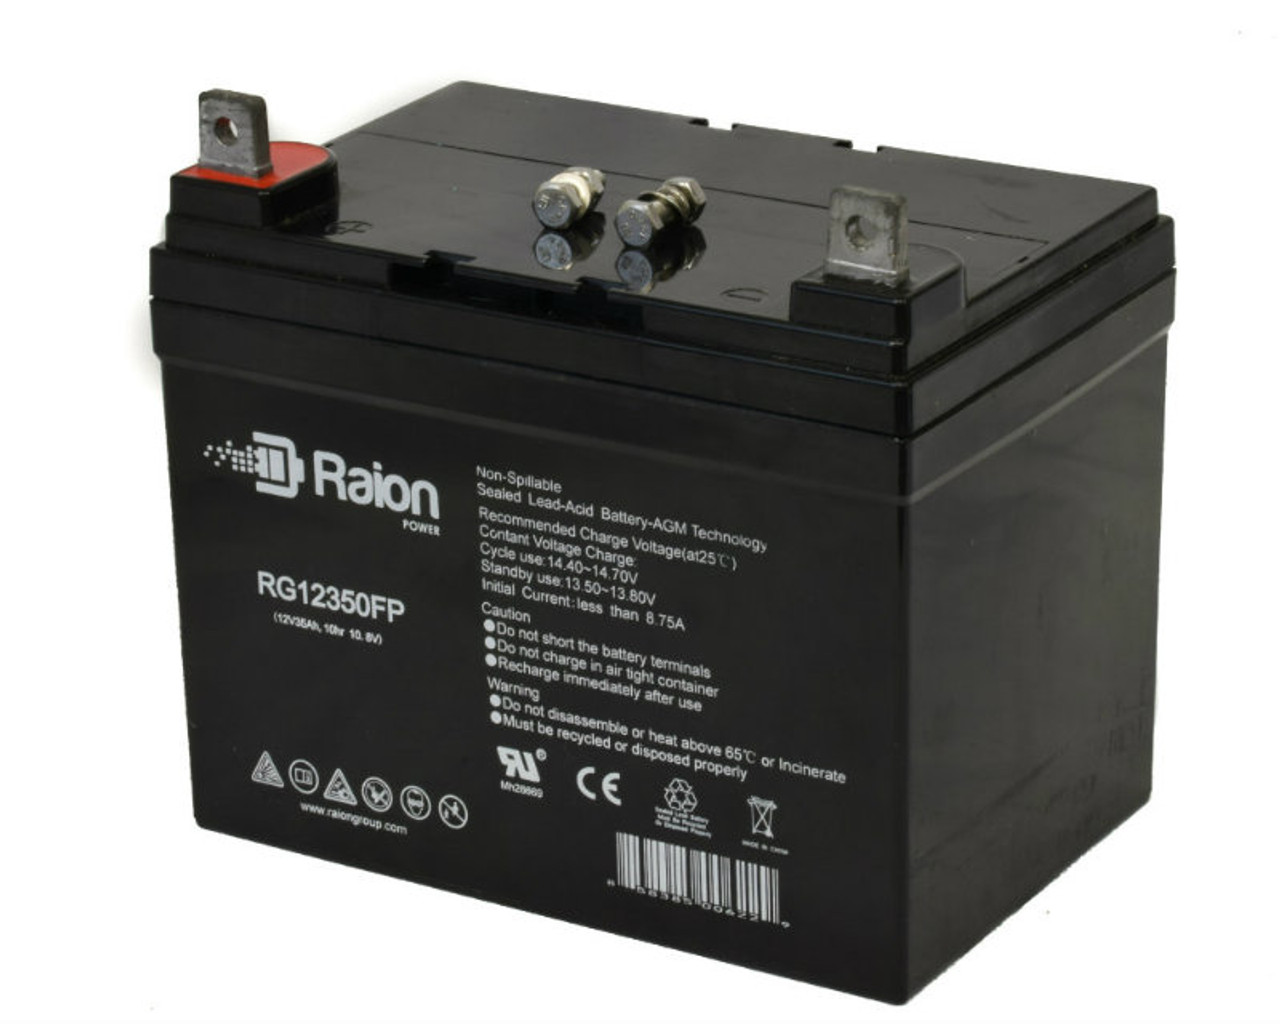 Raion Power Replacement 12V 35Ah RG12350FP Battery for Scotts (By Murray) S2048